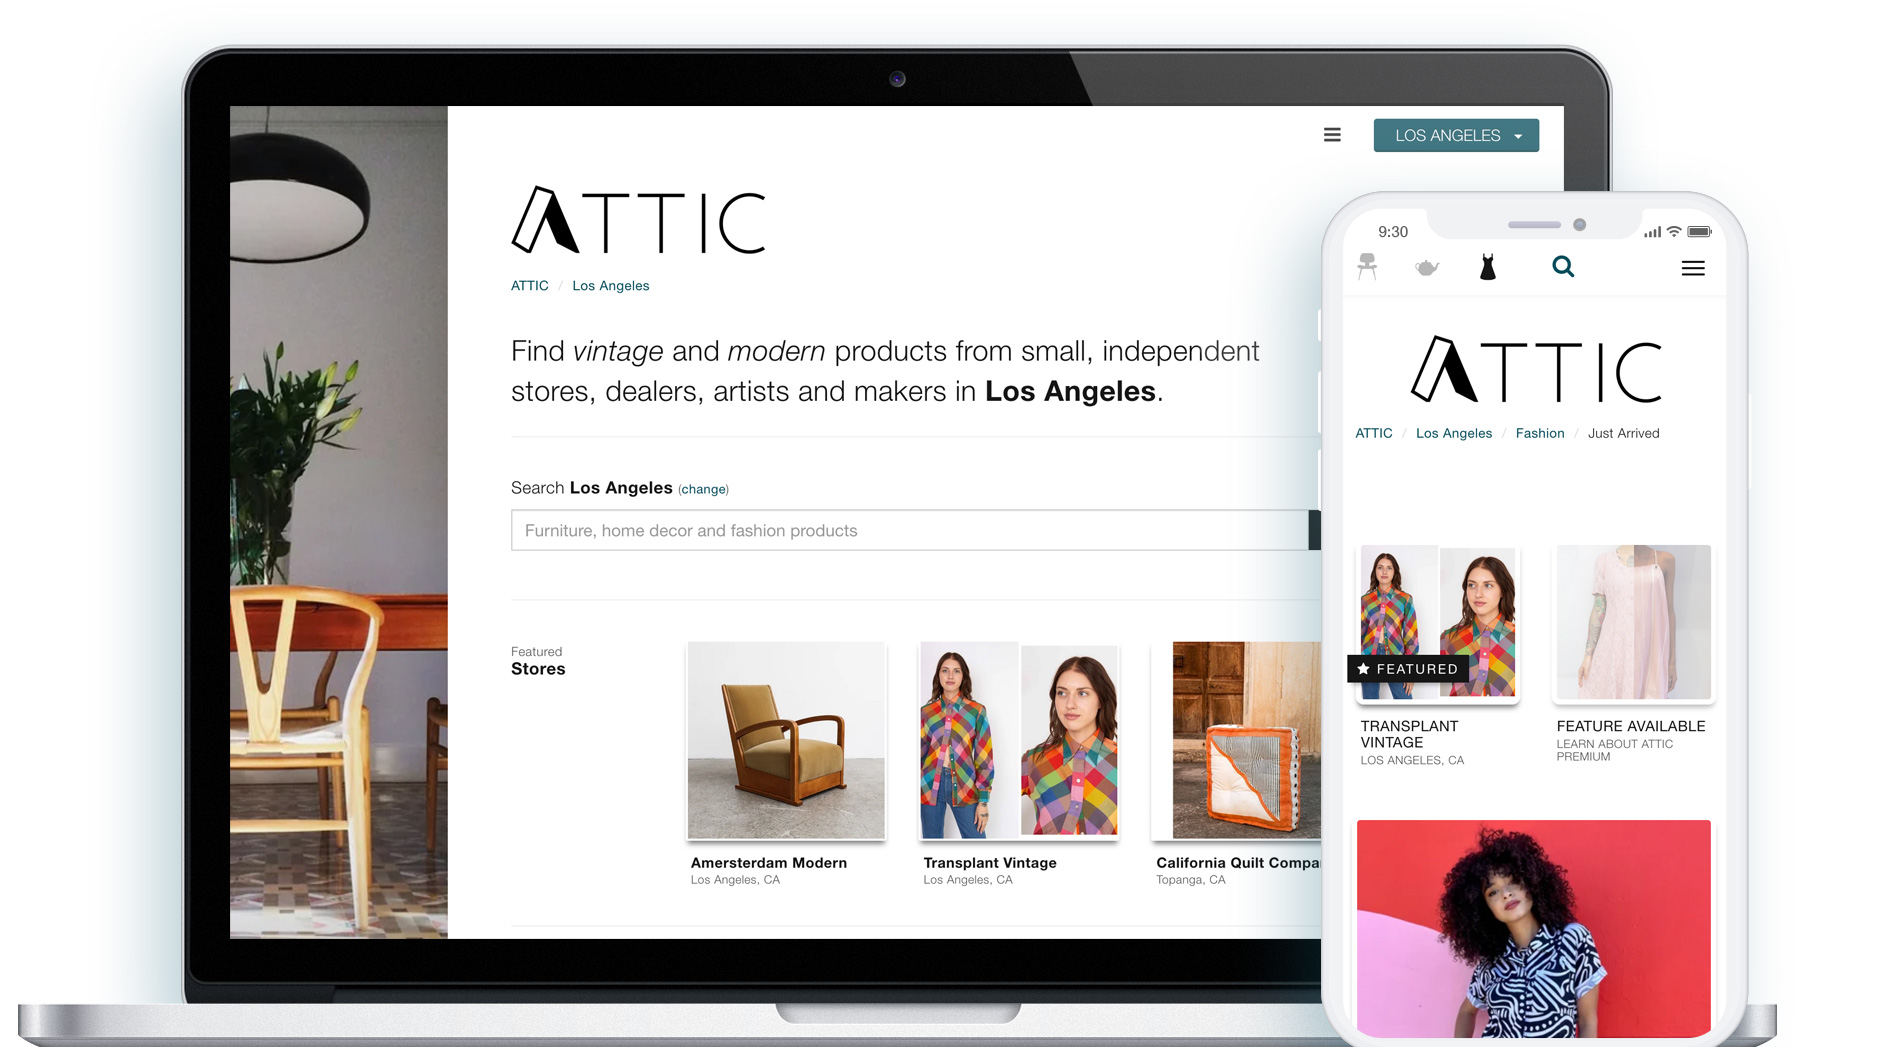 Los Angeles product pages with featured stores